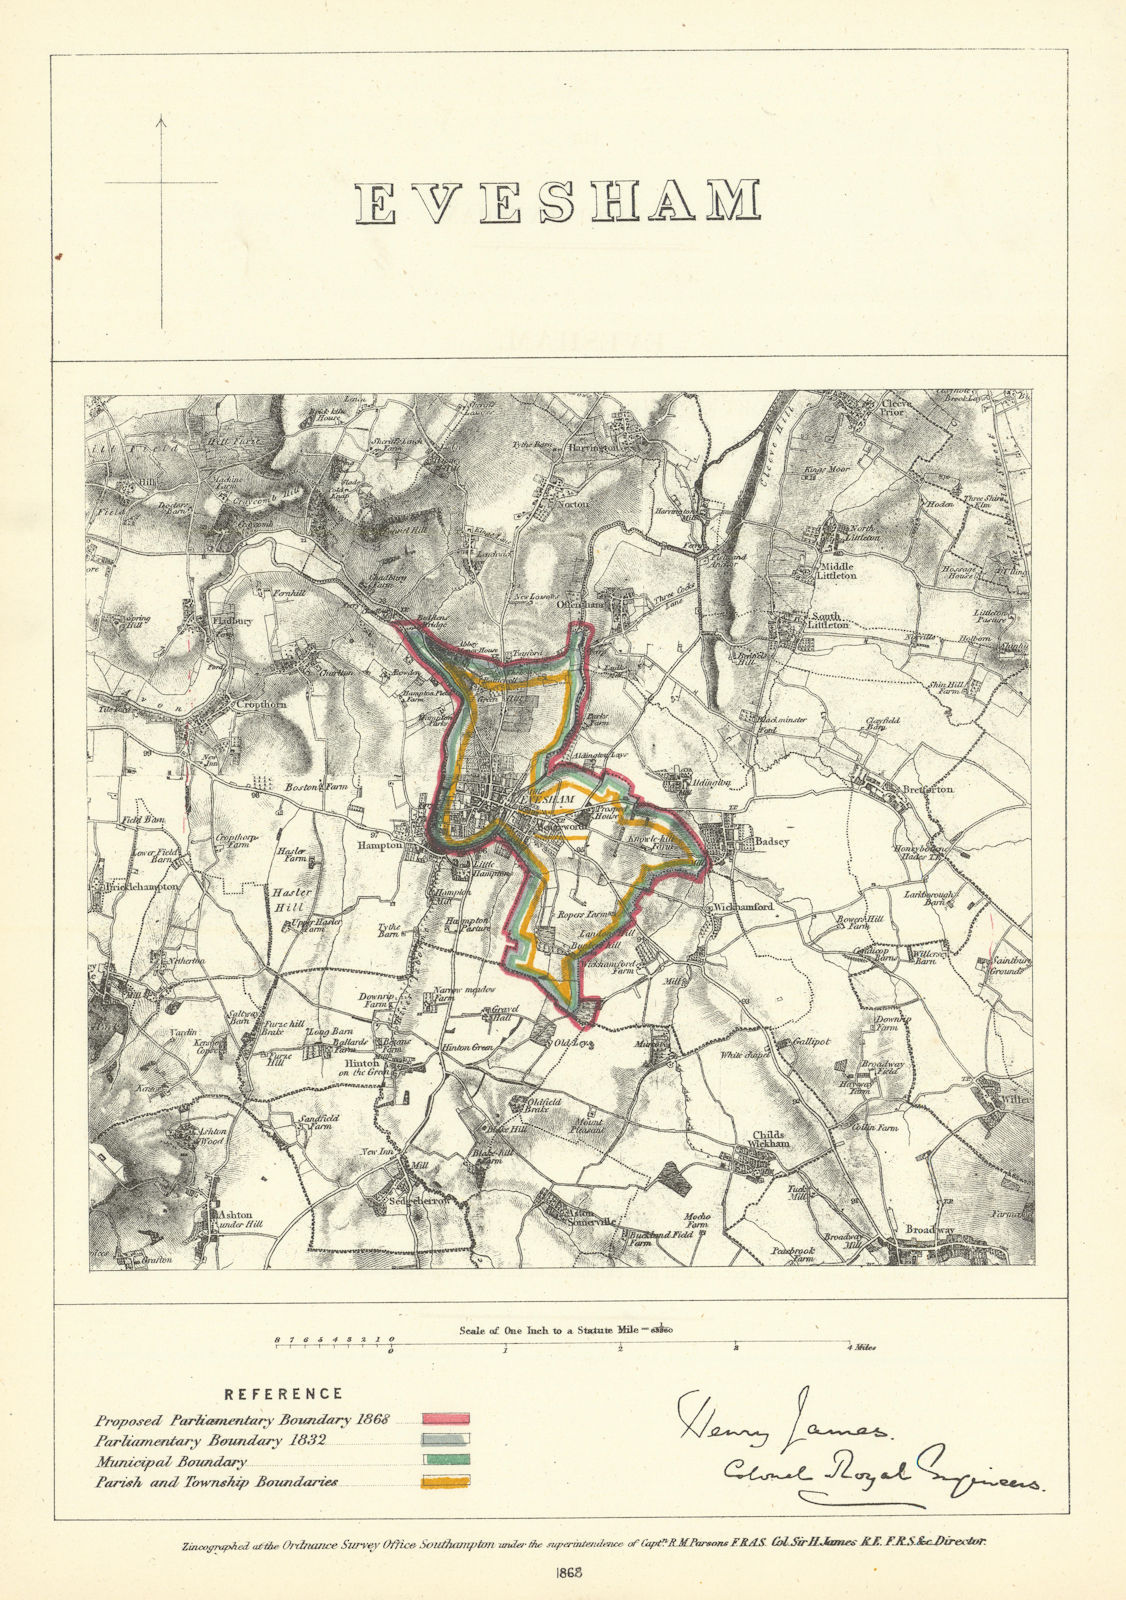 Evesham, Worcestershire. JAMES. Parliamentary Boundary Commission 1868 old map